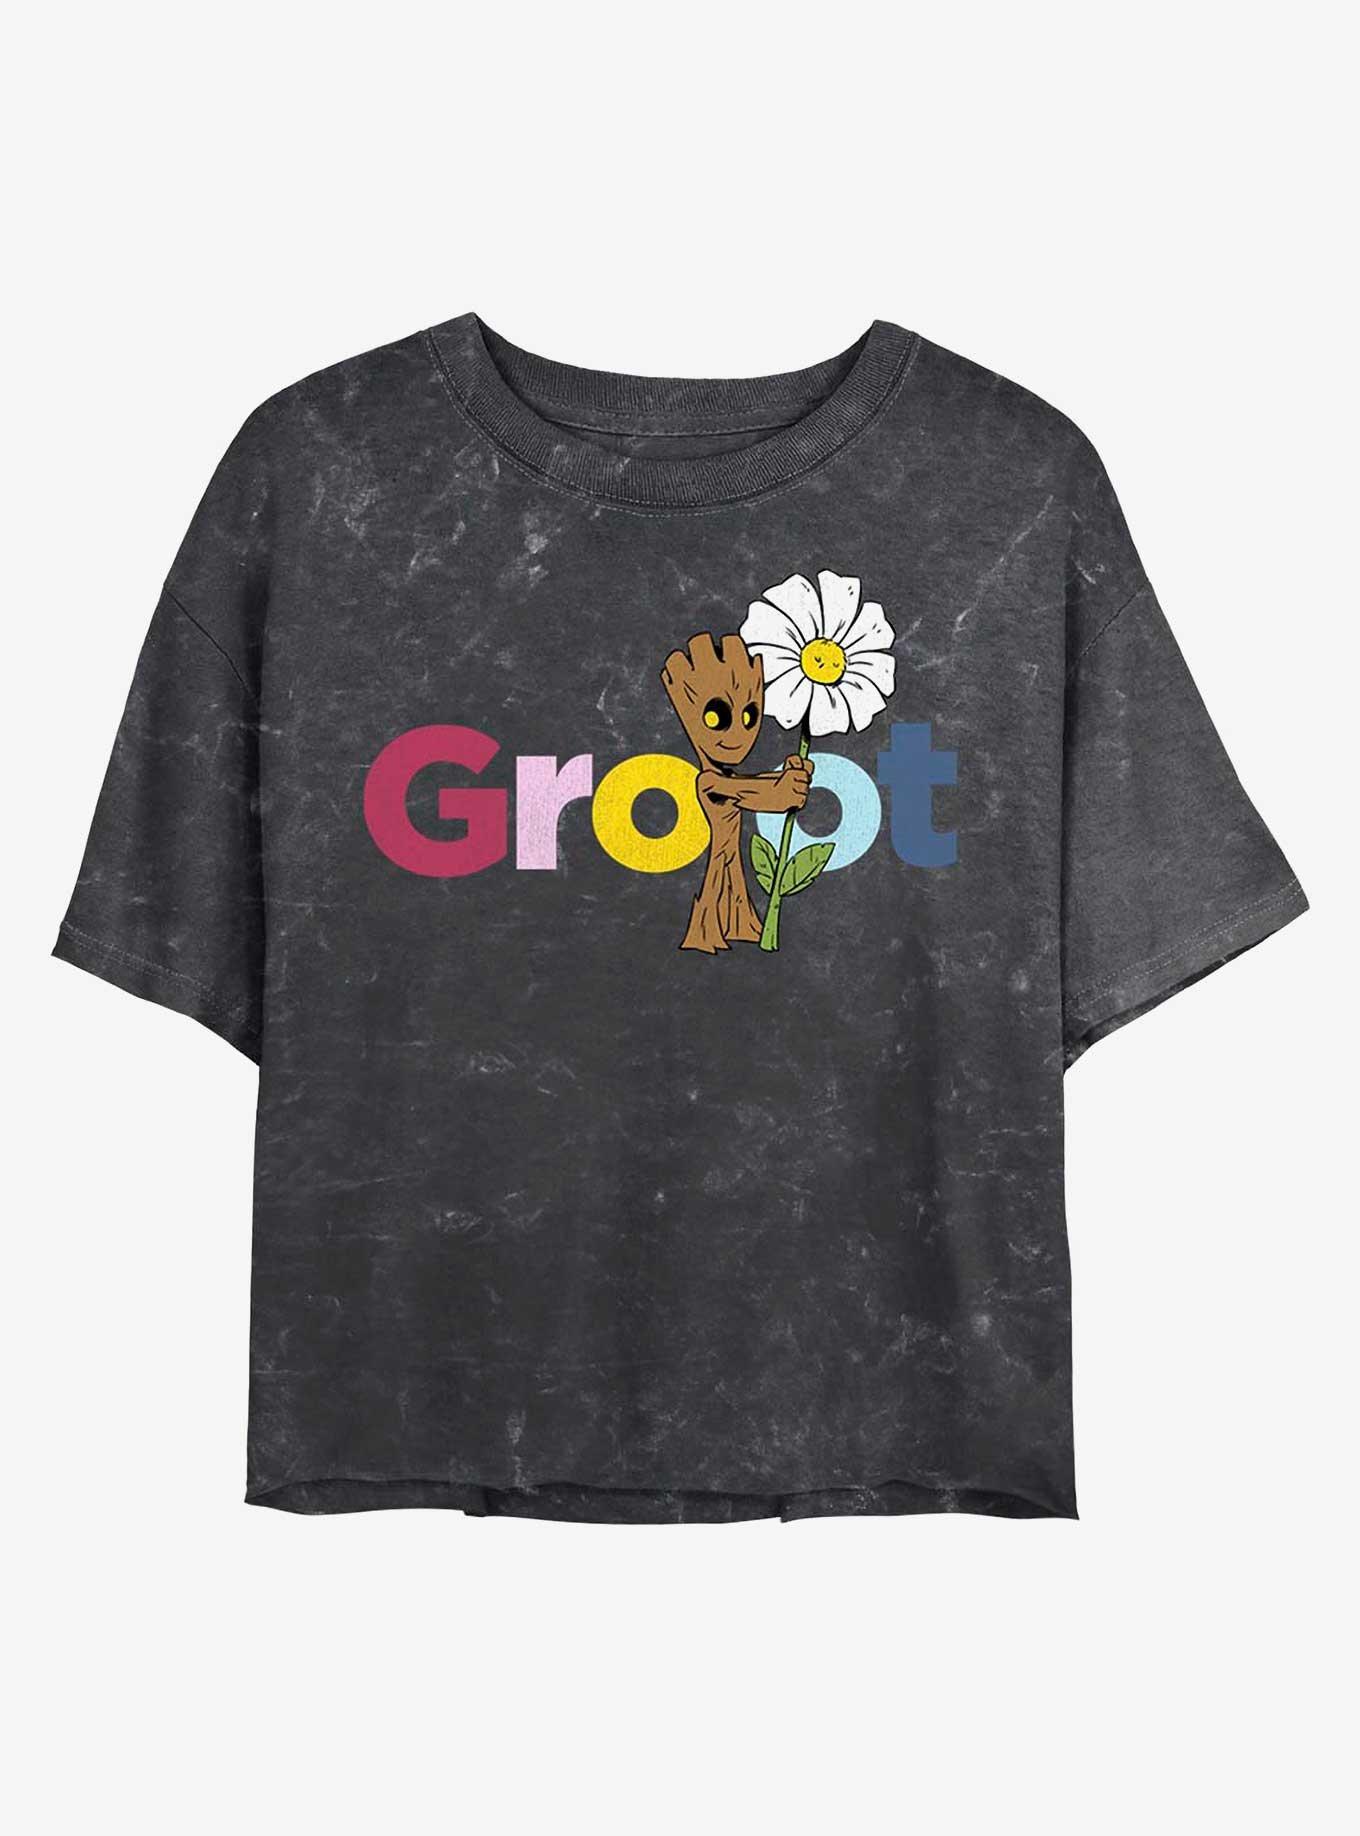 Marvel Guardians of the Galaxy Groot Mineral Wash Crop Girls T-Shirt, BLACK, hi-res